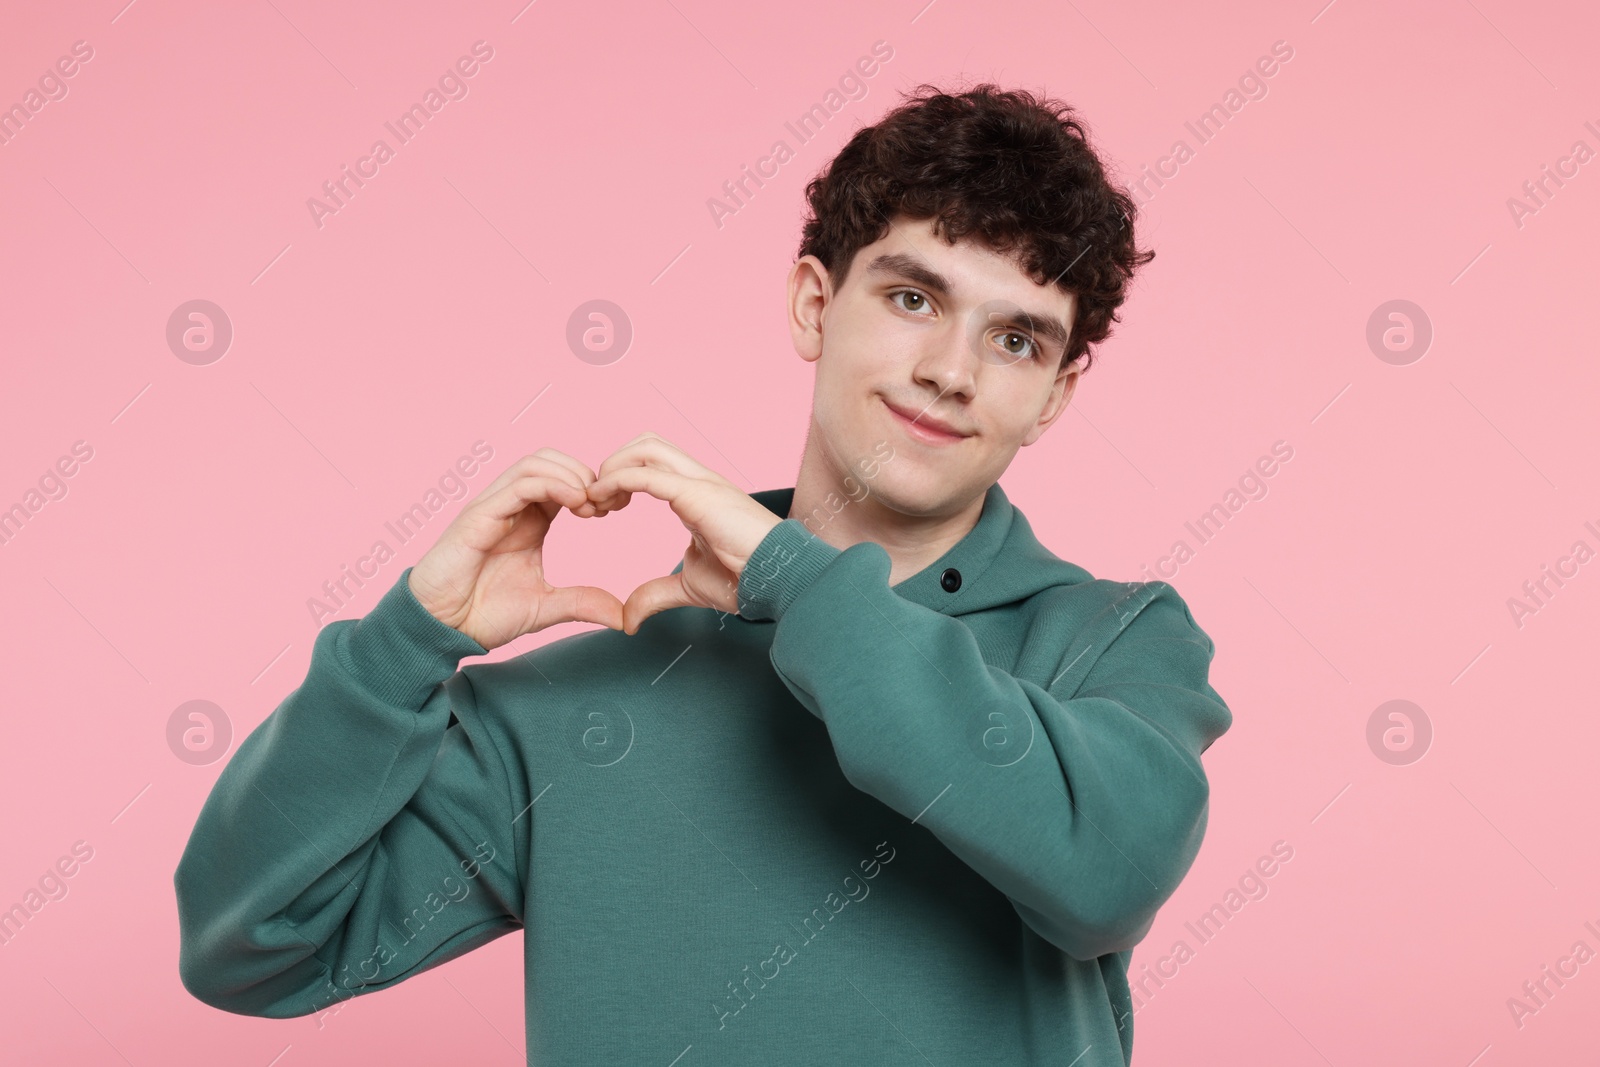 Photo of Happy young man showing heart gesture with hands on pink background